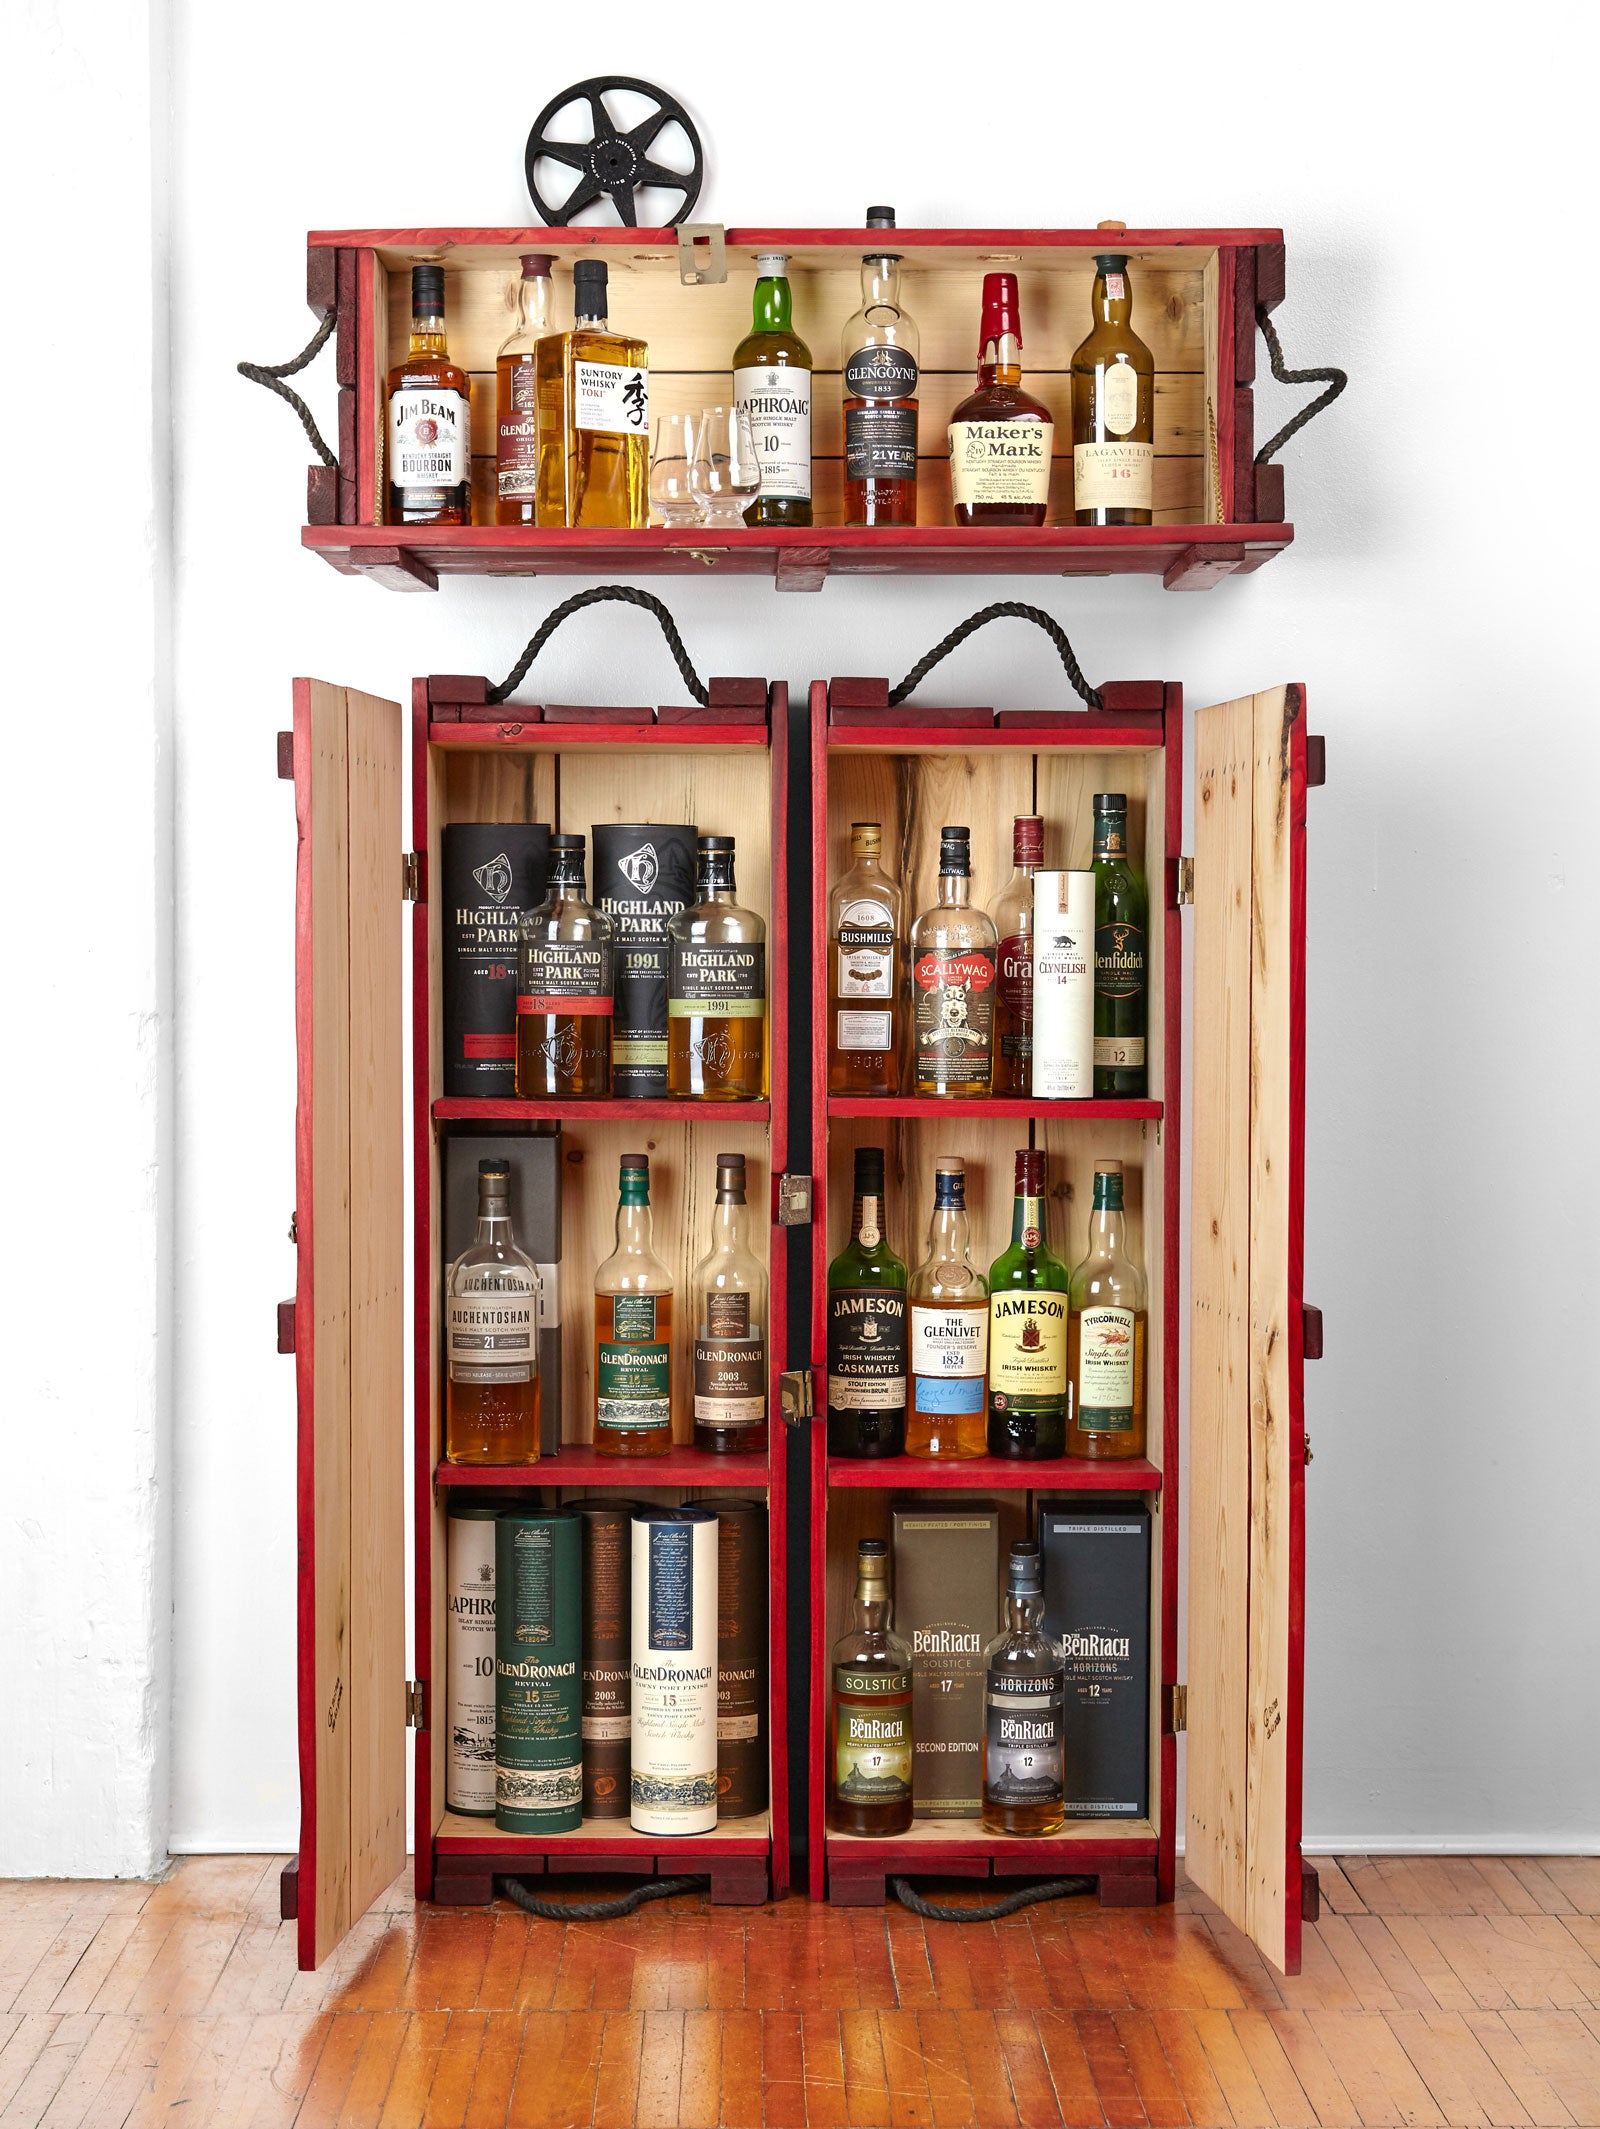 Whiskey cabinet and mini Bar | Red wooden liquor cabinets | Whiskey, scotch, rye display